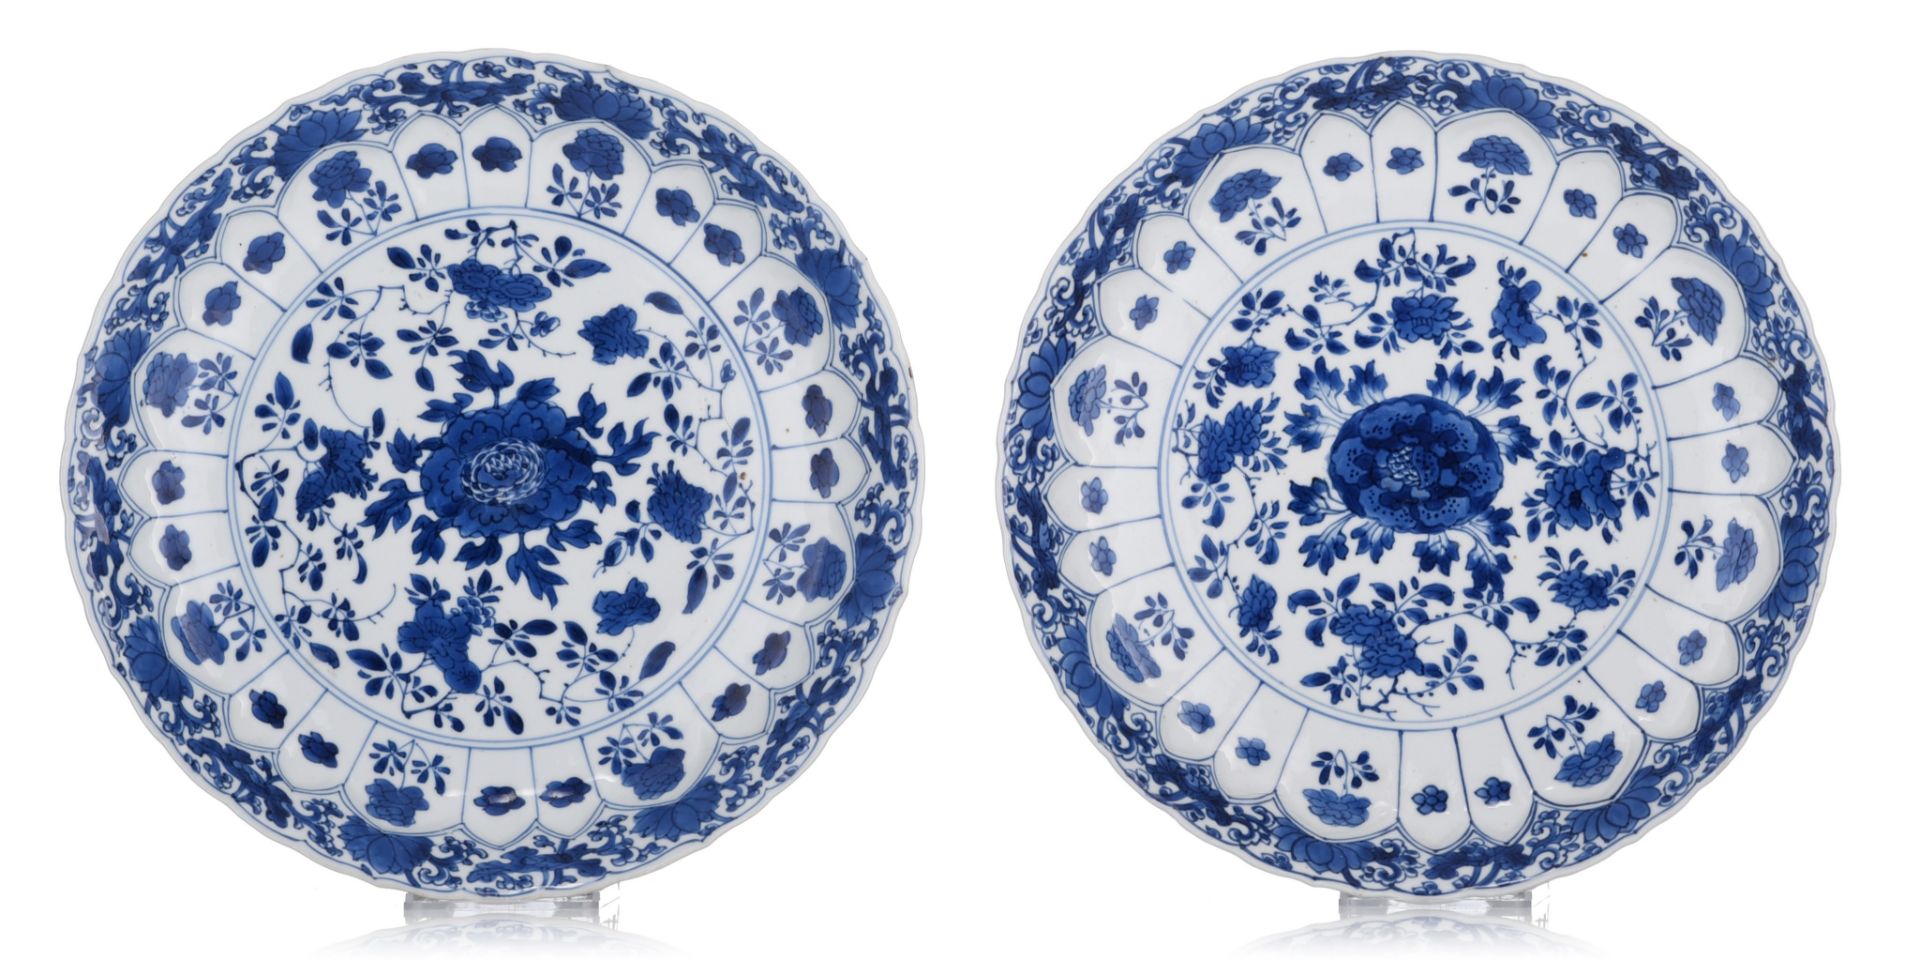 Two Chinese blue and white lobed plates, with a Chenghua mark, Kangxi period, ¯ 26 cm